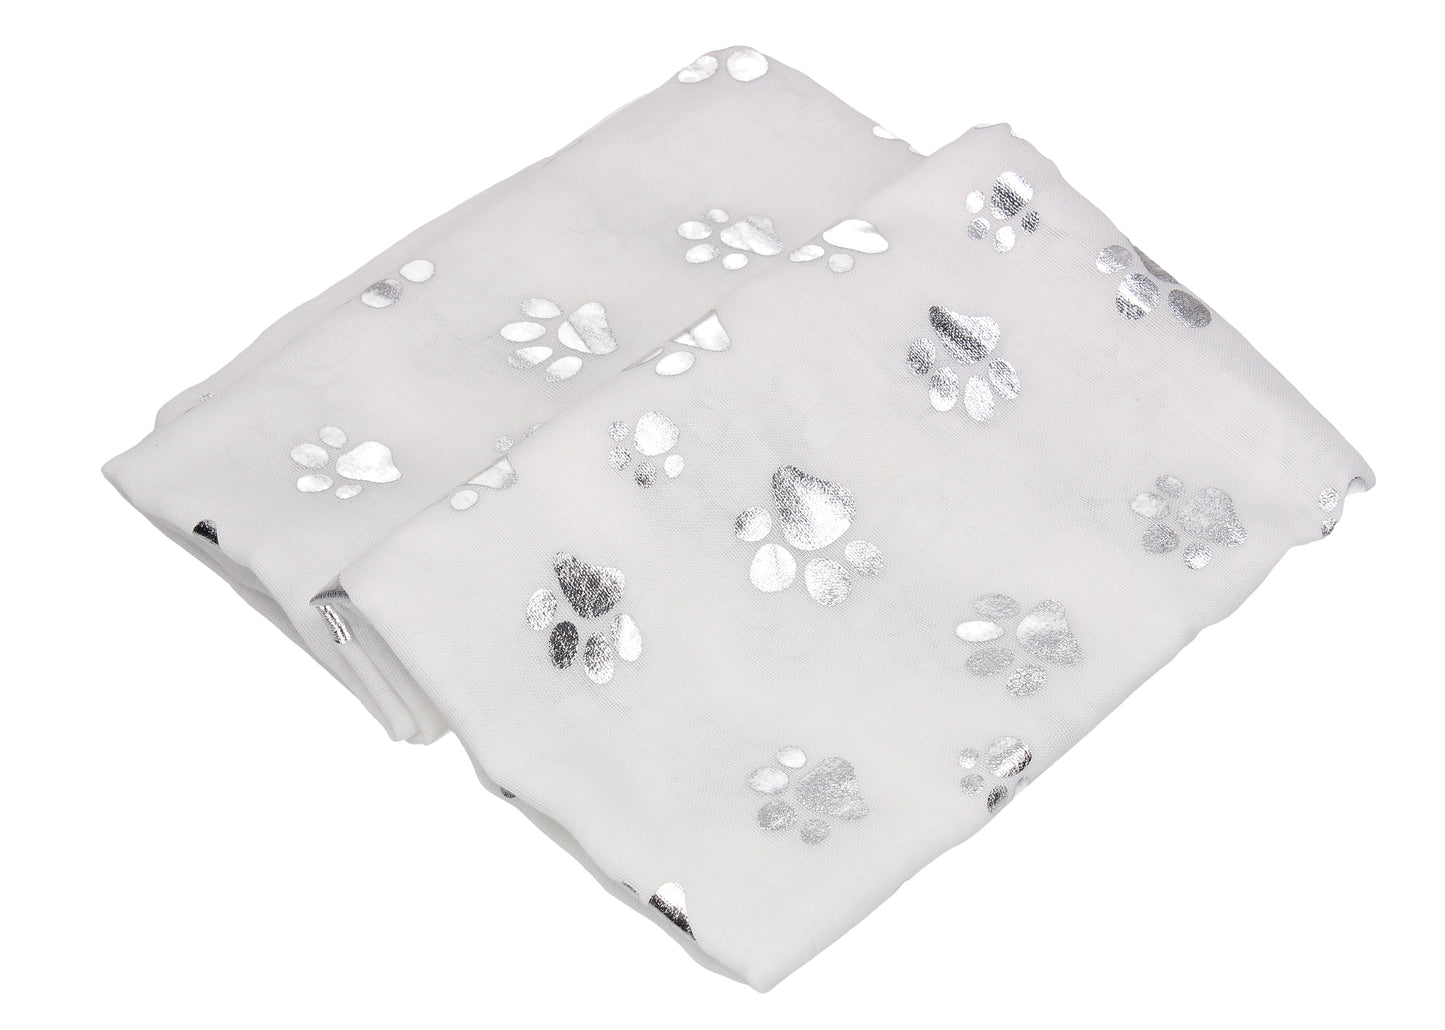 Holly Silver Foil Paw Print Puppy Dog Scarf White